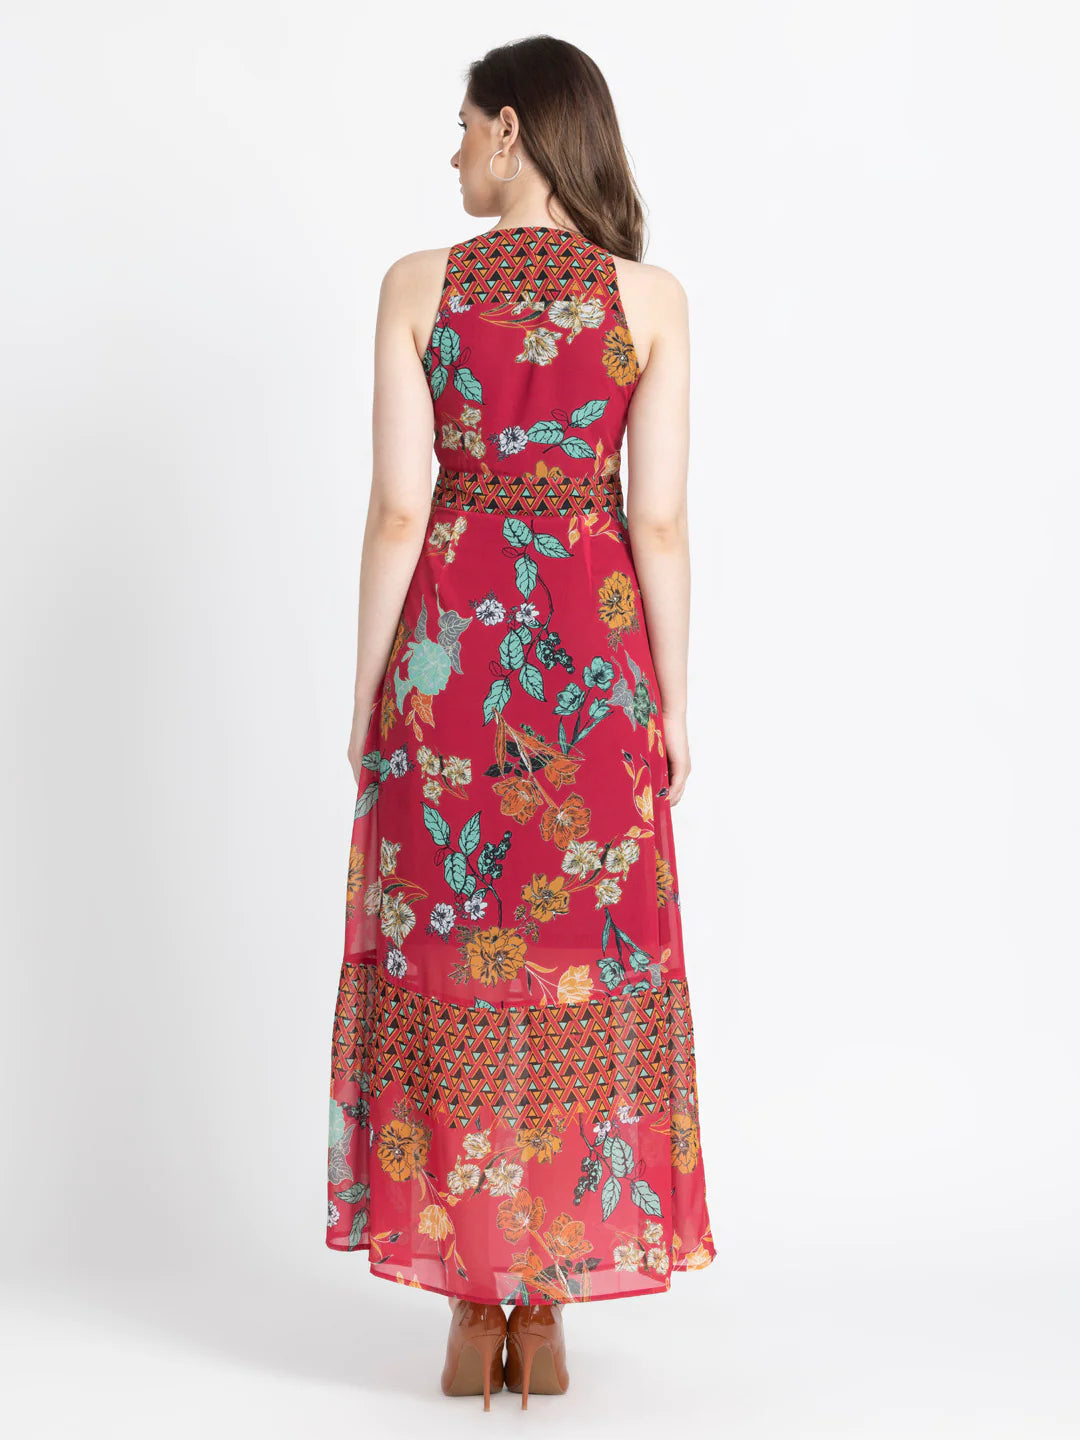 Red Floral Maxi Dress | Red Halter Floral Maxi Dress